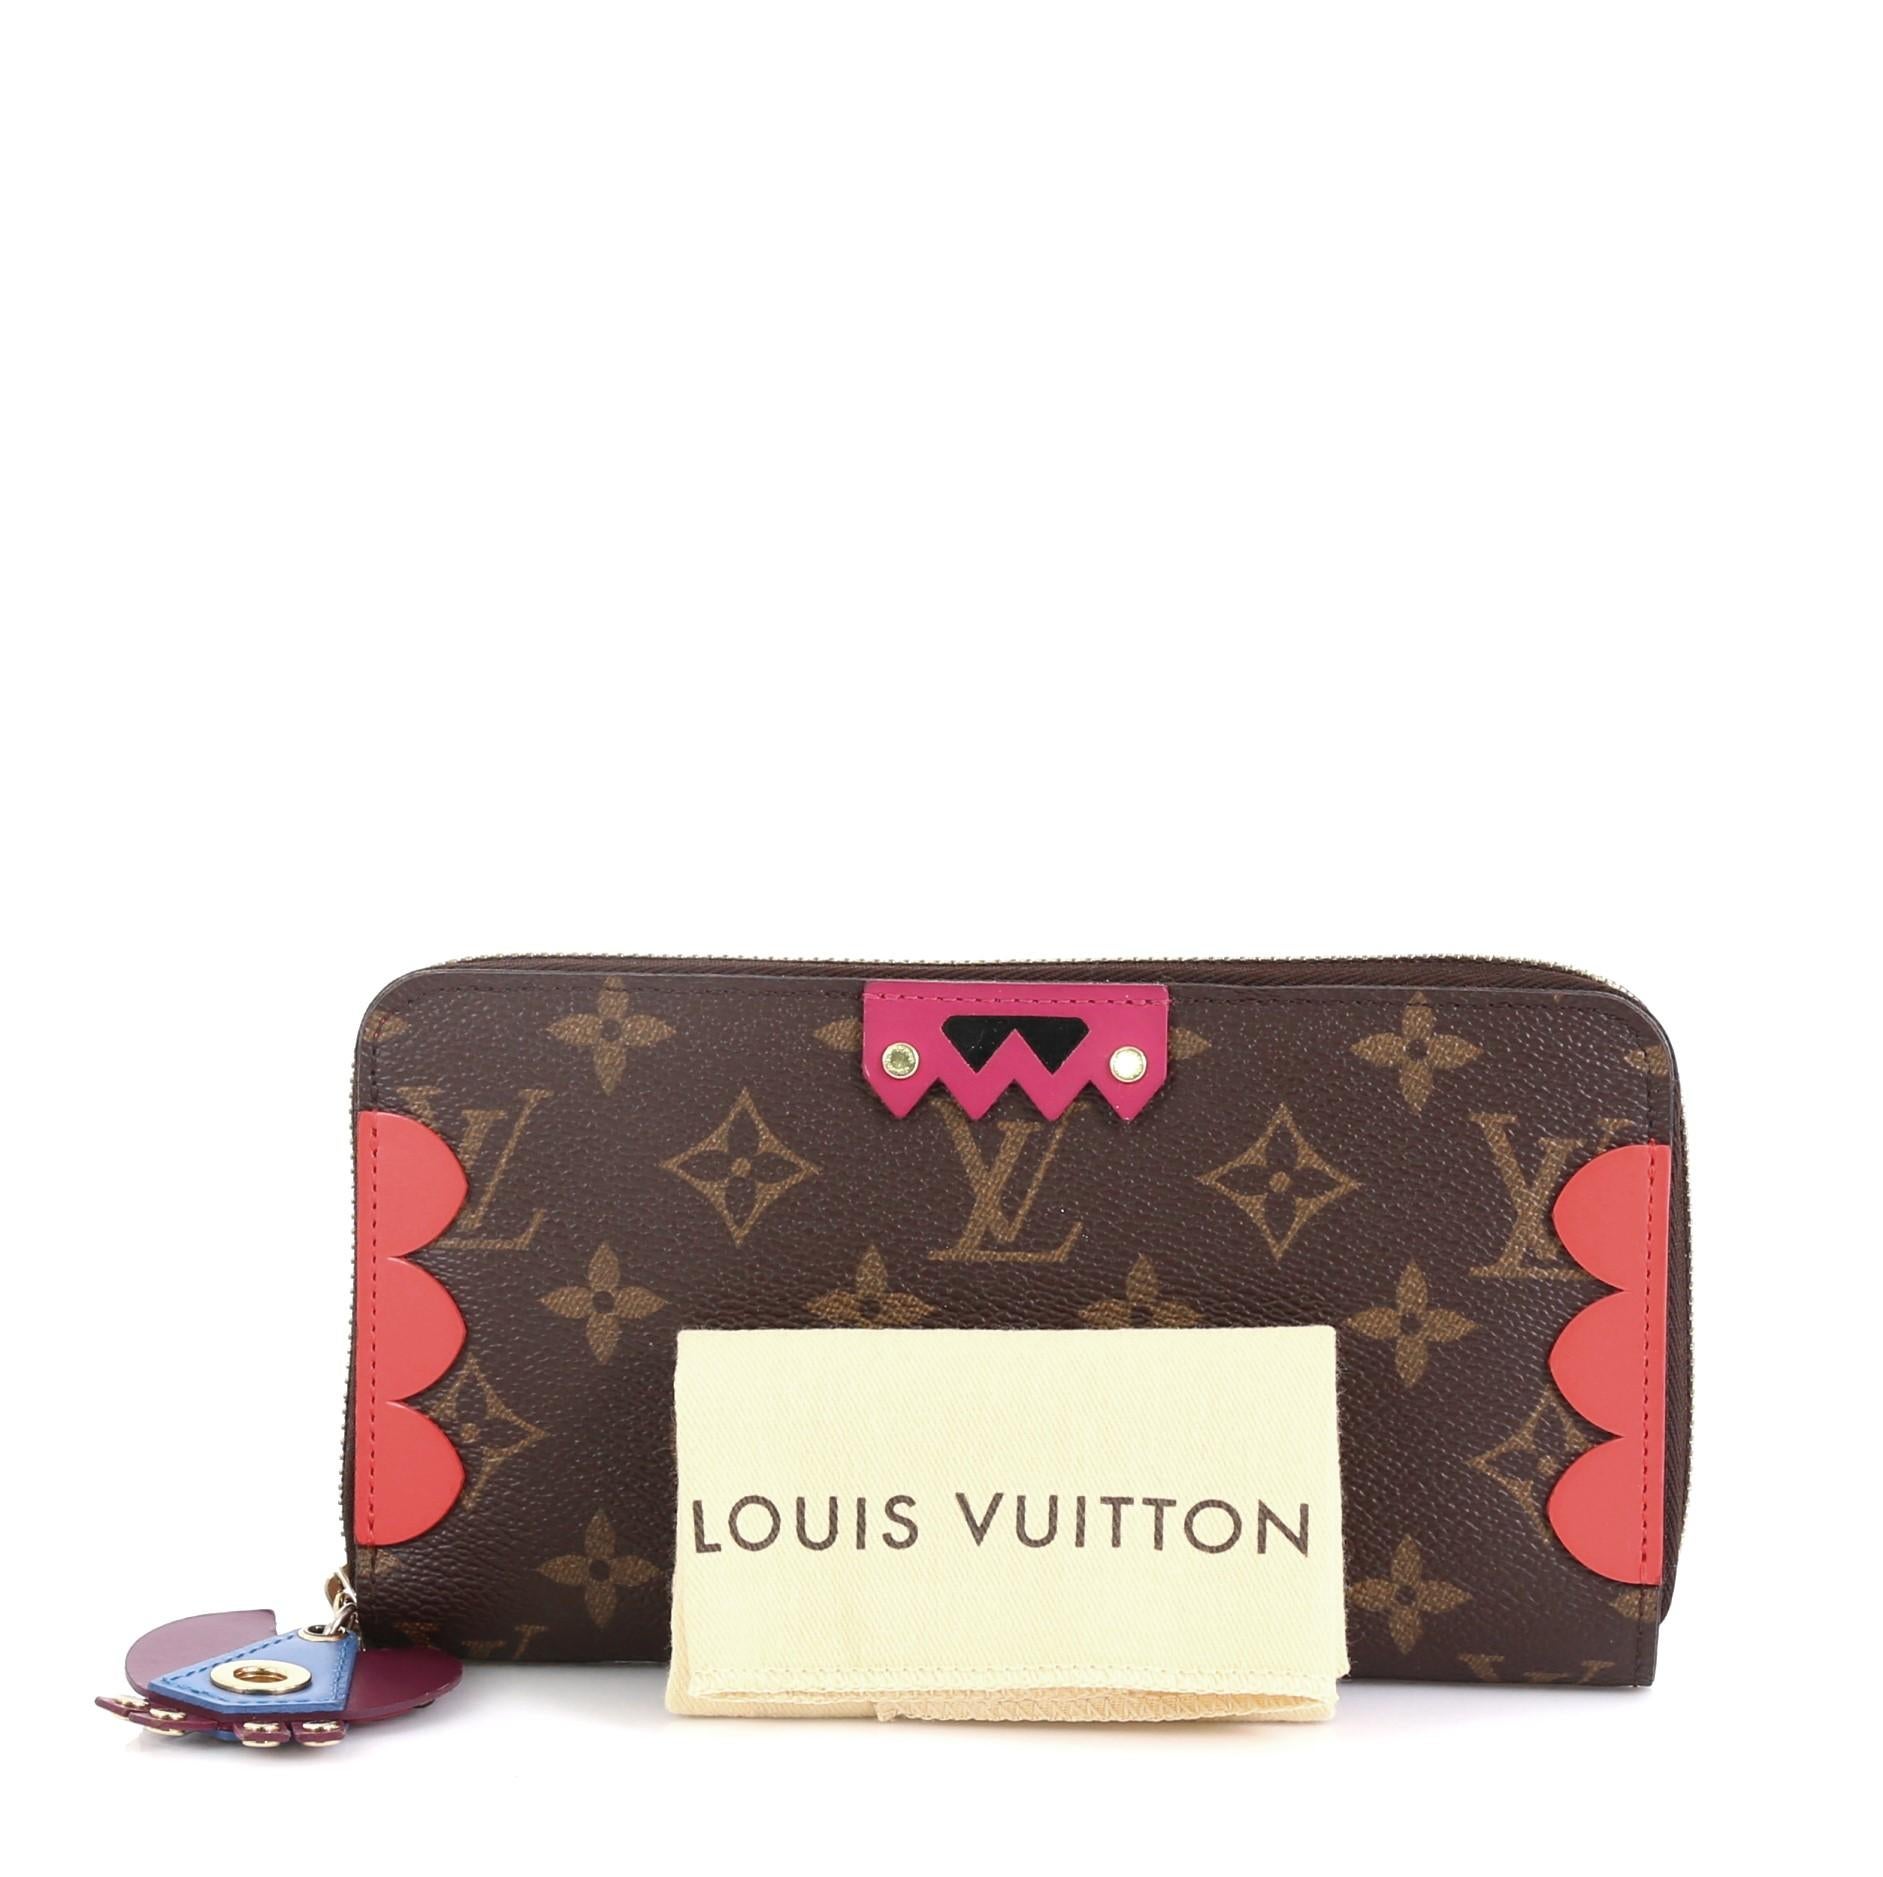 This Louis Vuitton Zippy Wallet Limited Edition Totem Monogram Canvas, crafted in brown monogram coated canvas, features tribal motif leather accents, multicolor tribal zipper pull and gold-tone hardware. Its zip closure opens to a red leather